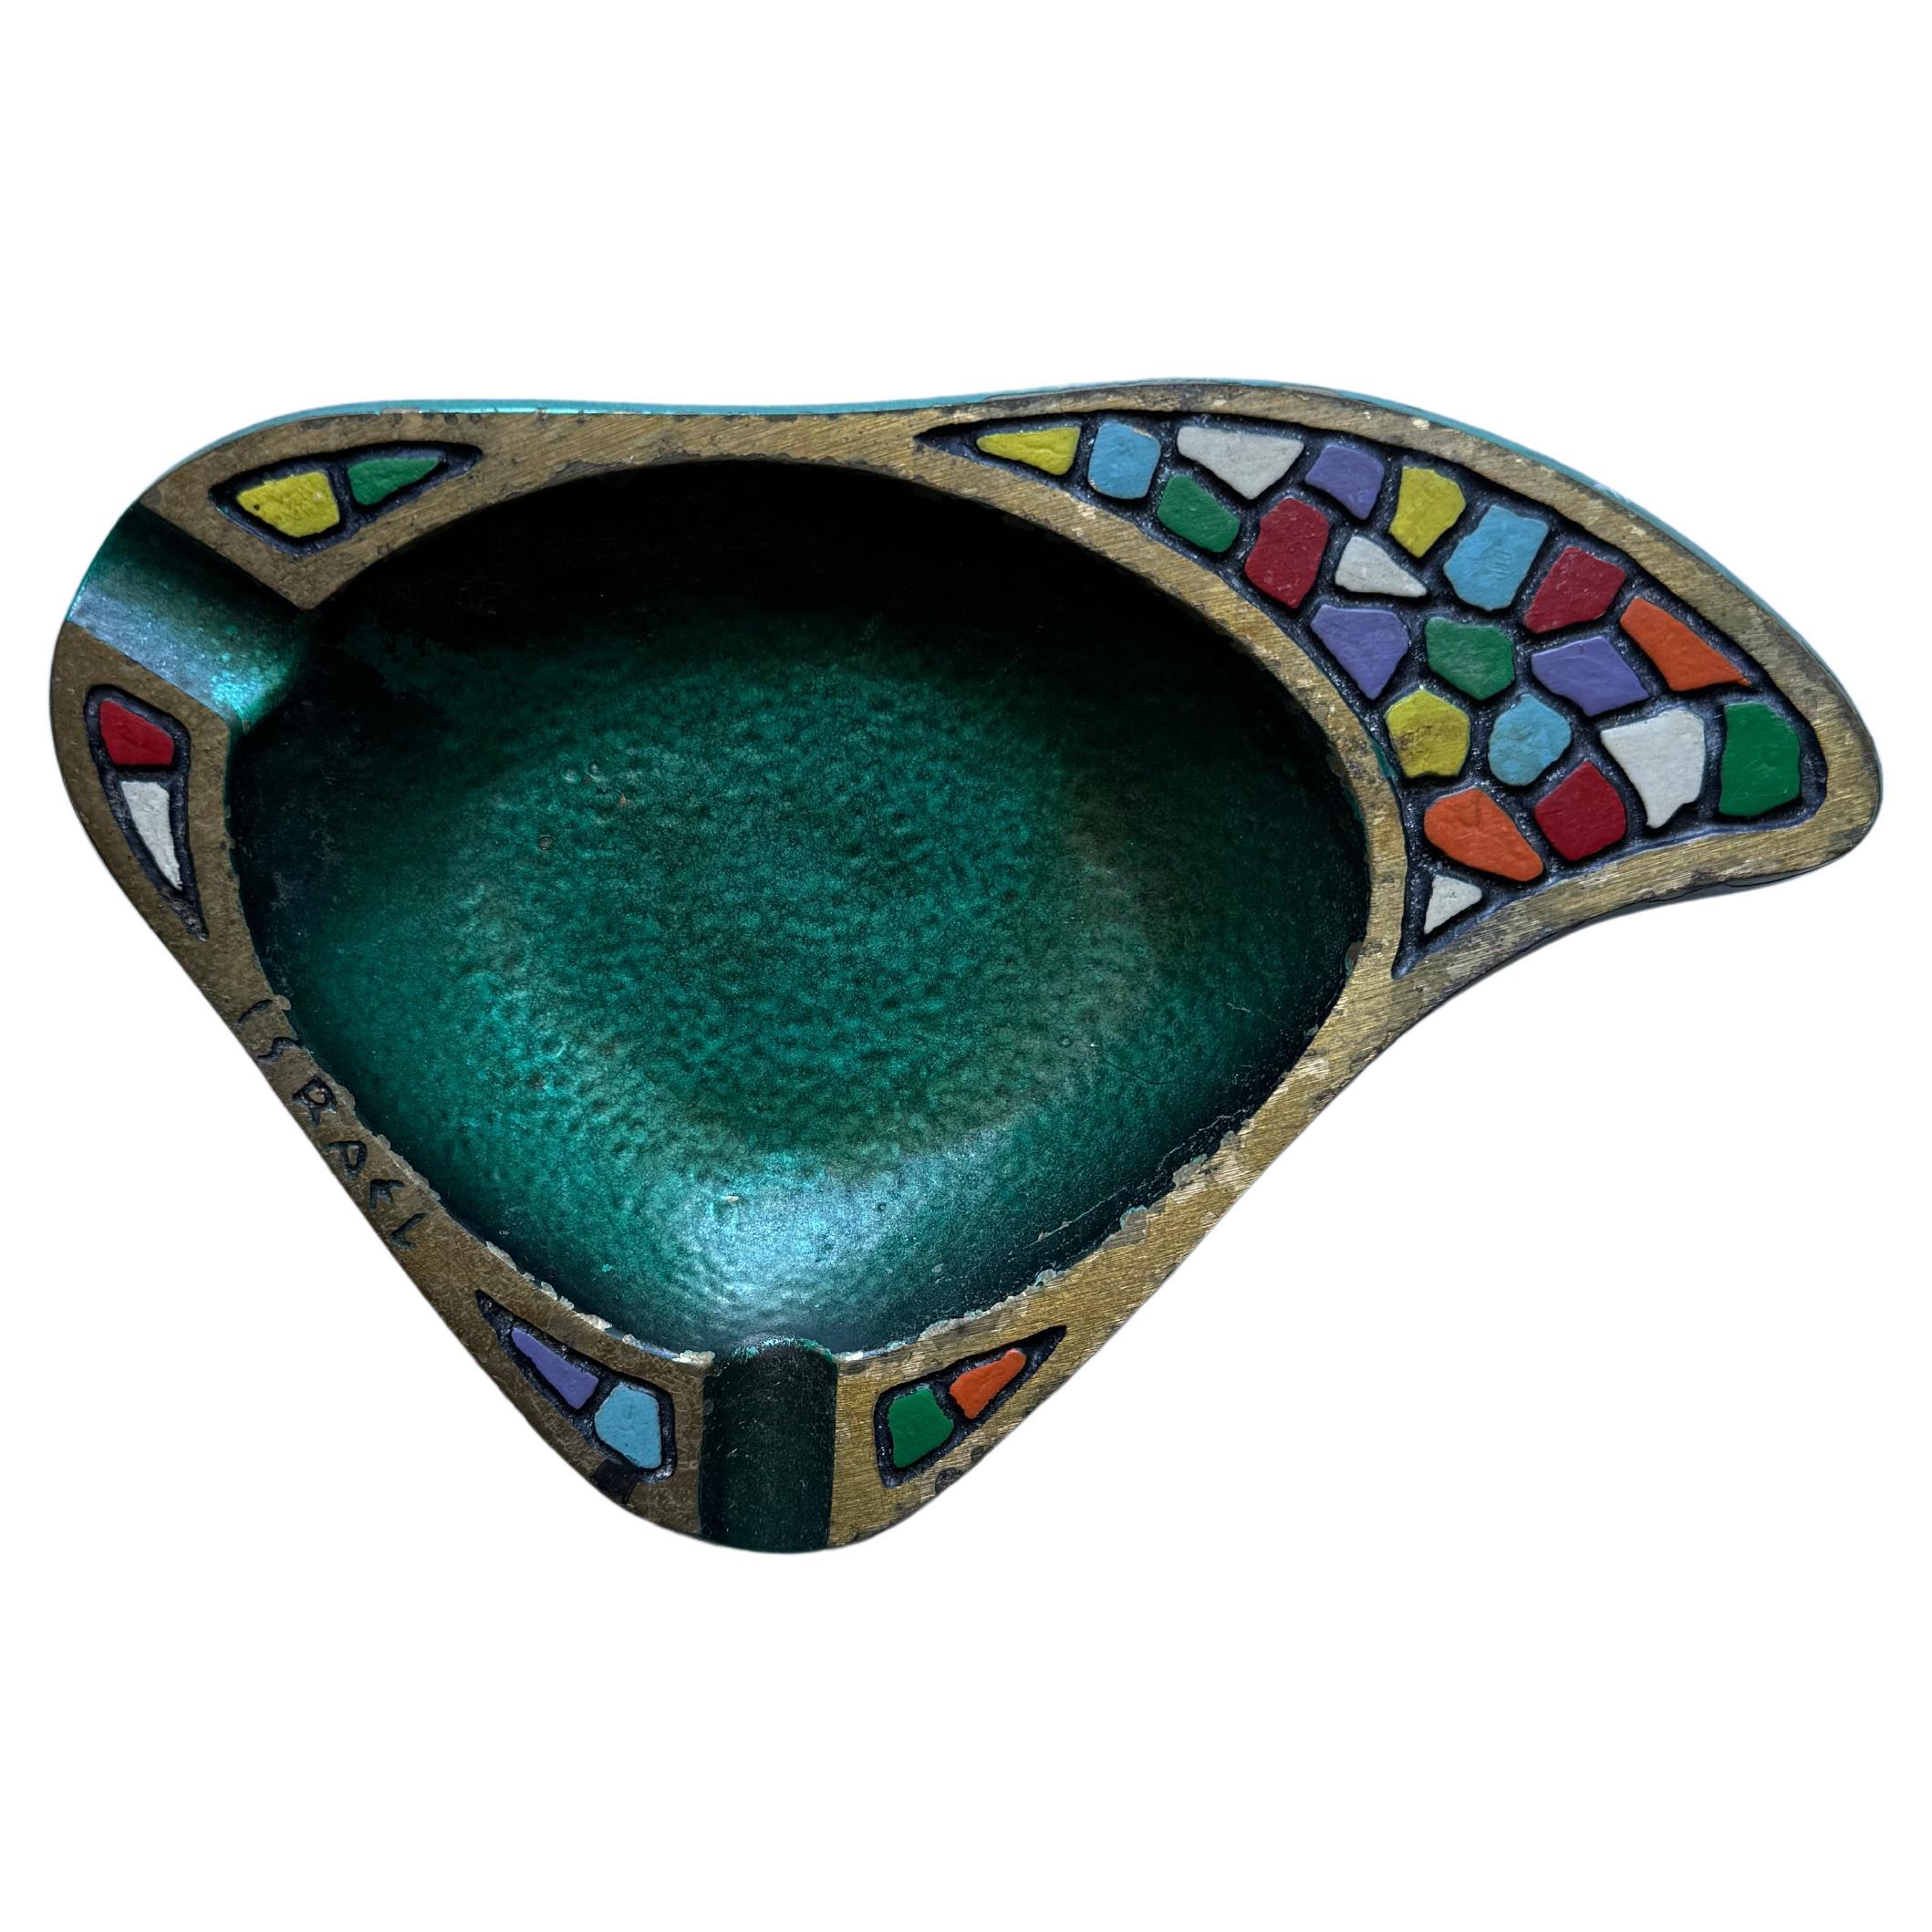 Solid Brass Hand Painted Ashtray By Dayagi, Israel 1960s